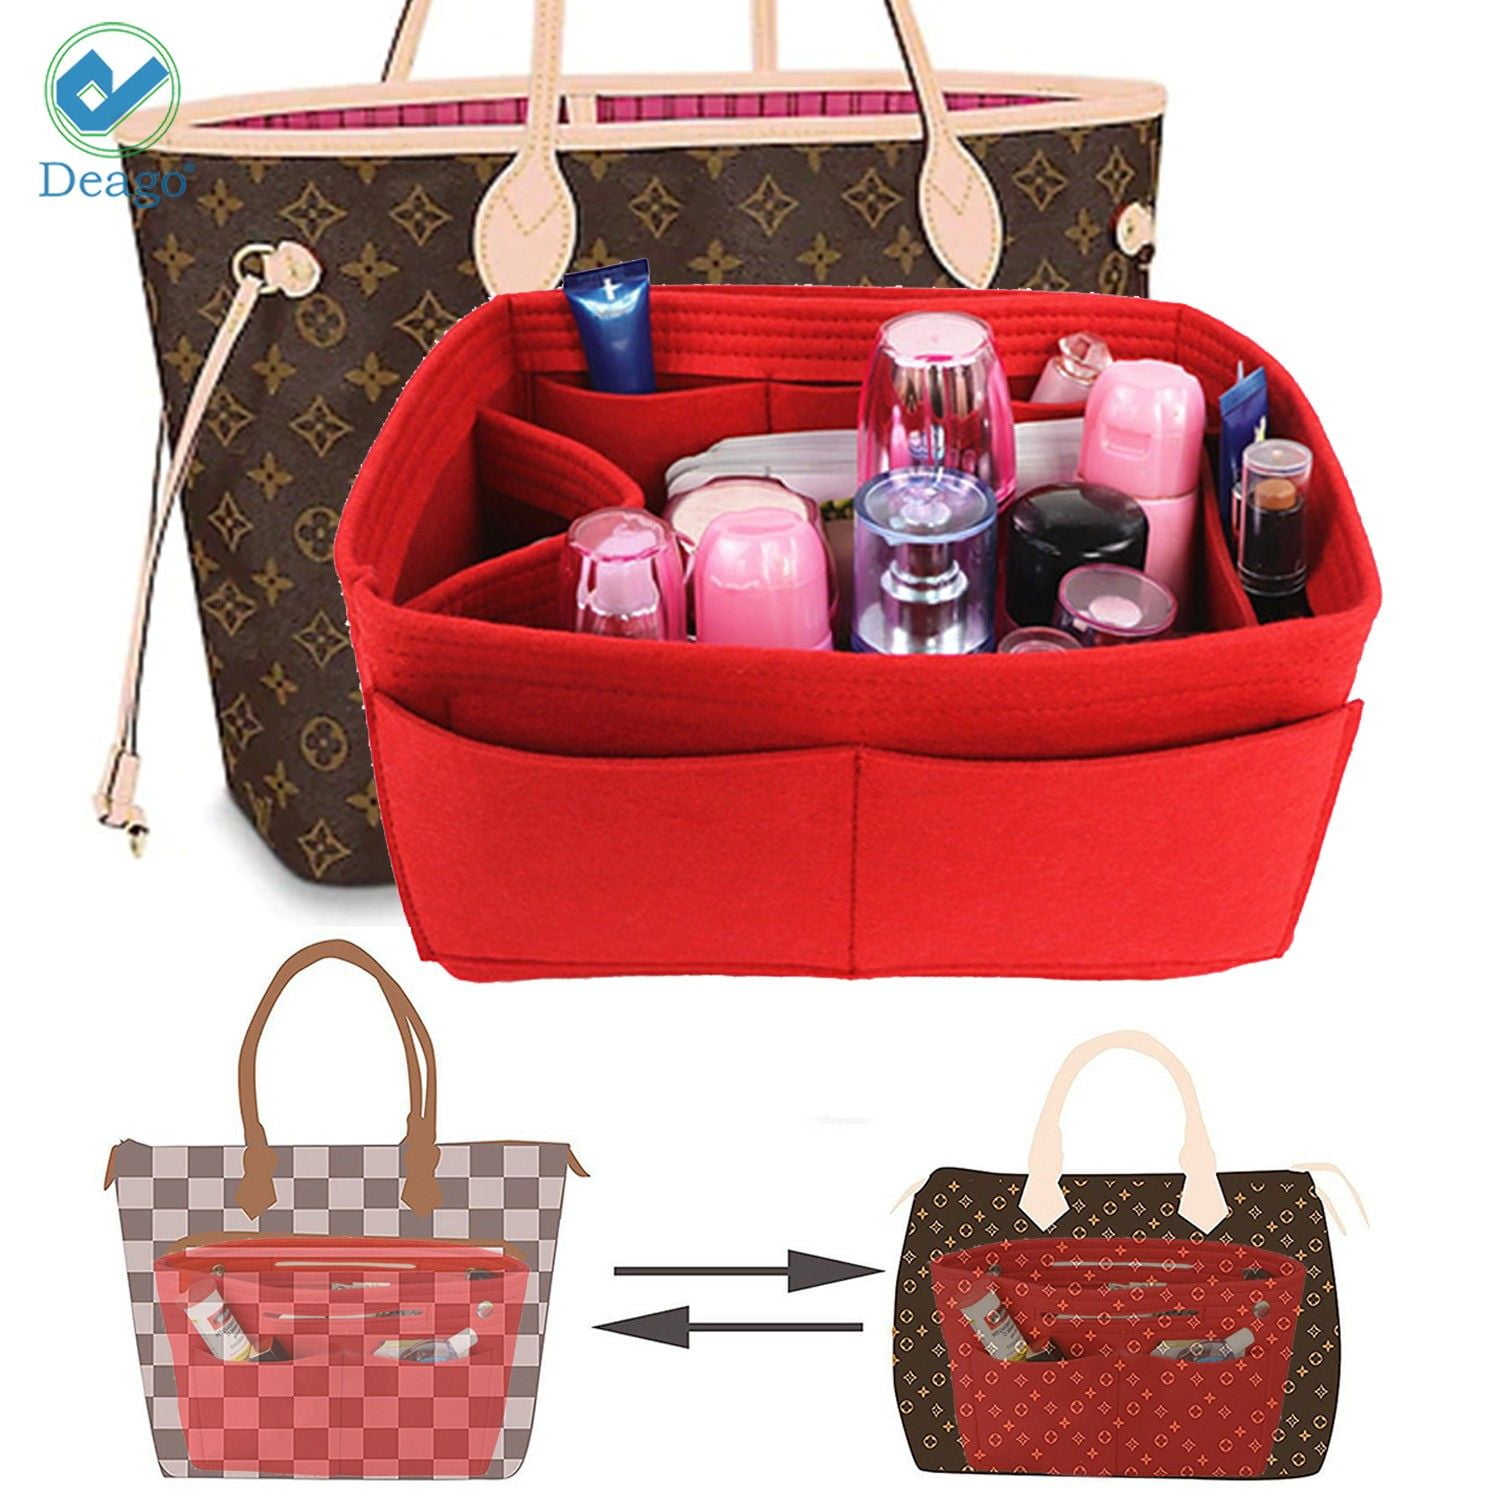 Purse Organizer Insert with Base Shaper, Handbag & Tote Organizer with Bag  Shaper, Felt Purse Bag Insert in Bag fit Neverfull mm : Amazon.in: Bags,  Wallets and Luggage